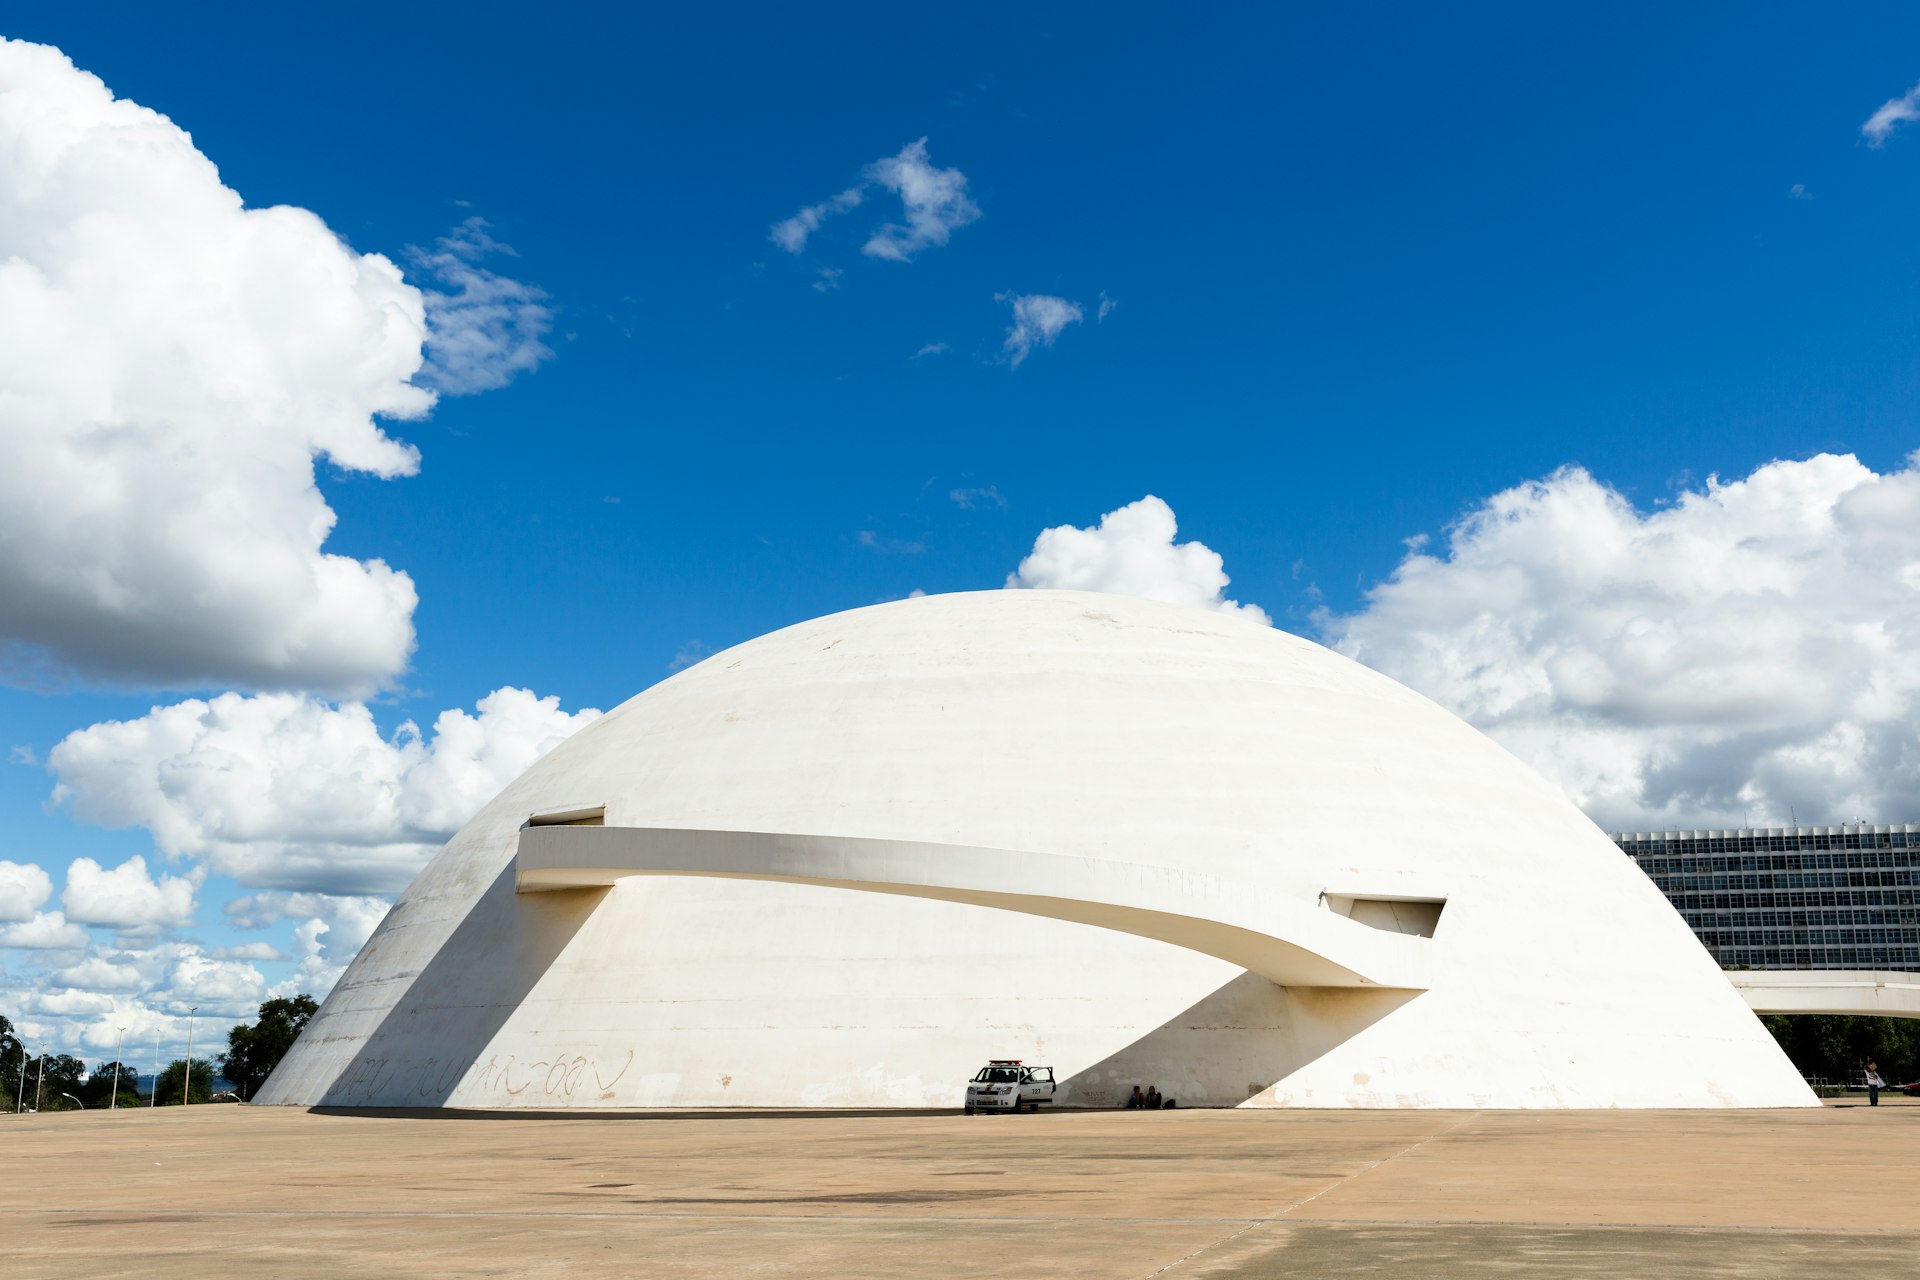 The white-domed exterior of Oscar Niemeyer’s National Museum in Brasília, under a blue sky with clouds